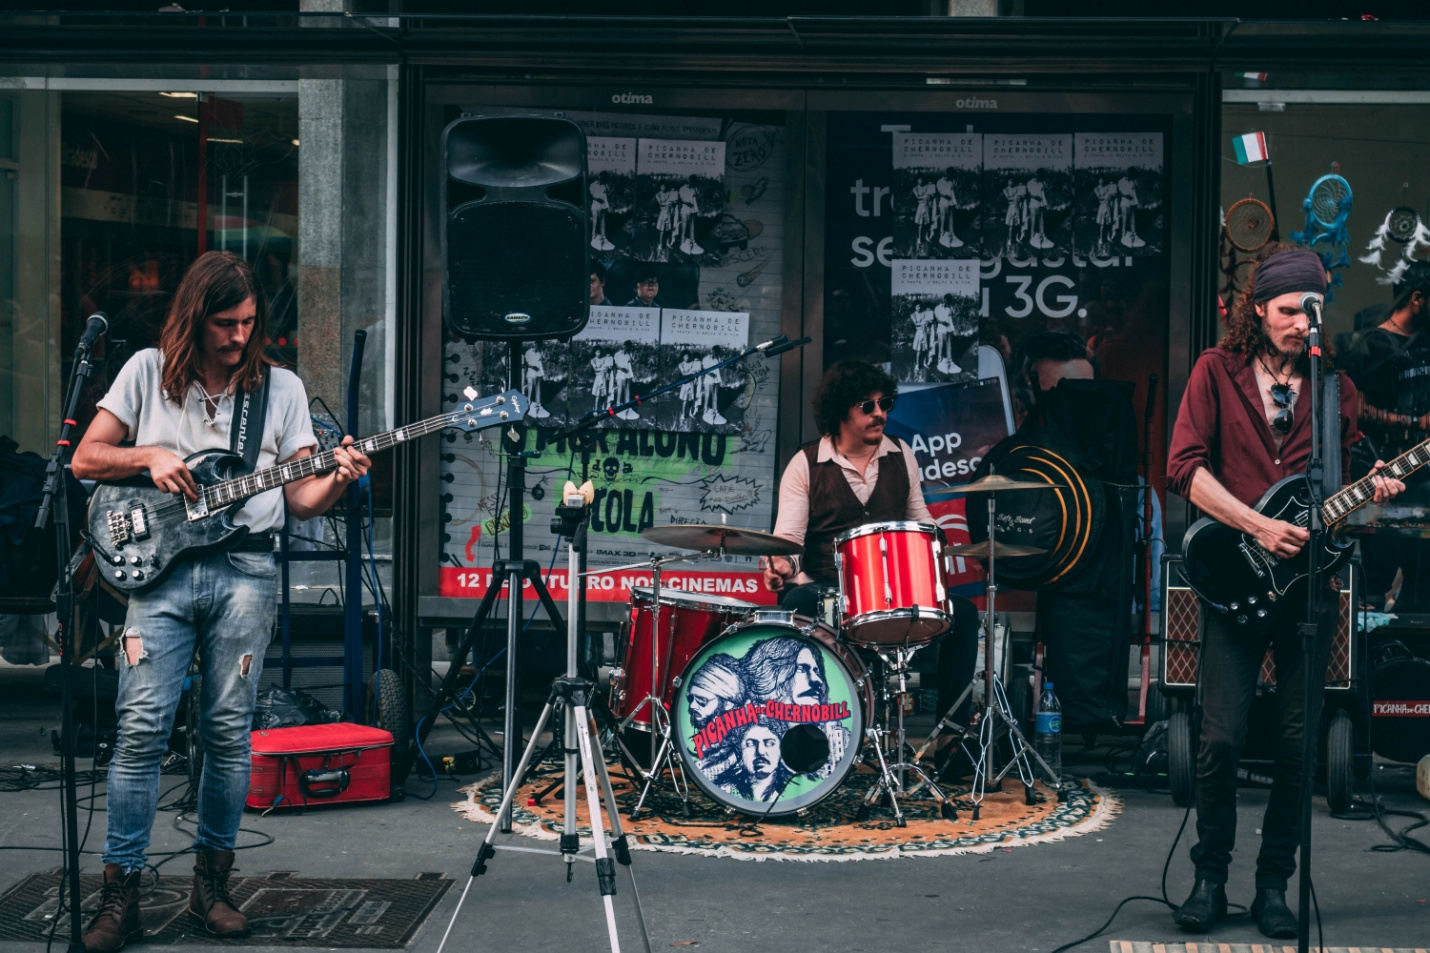  A band performing outside a building